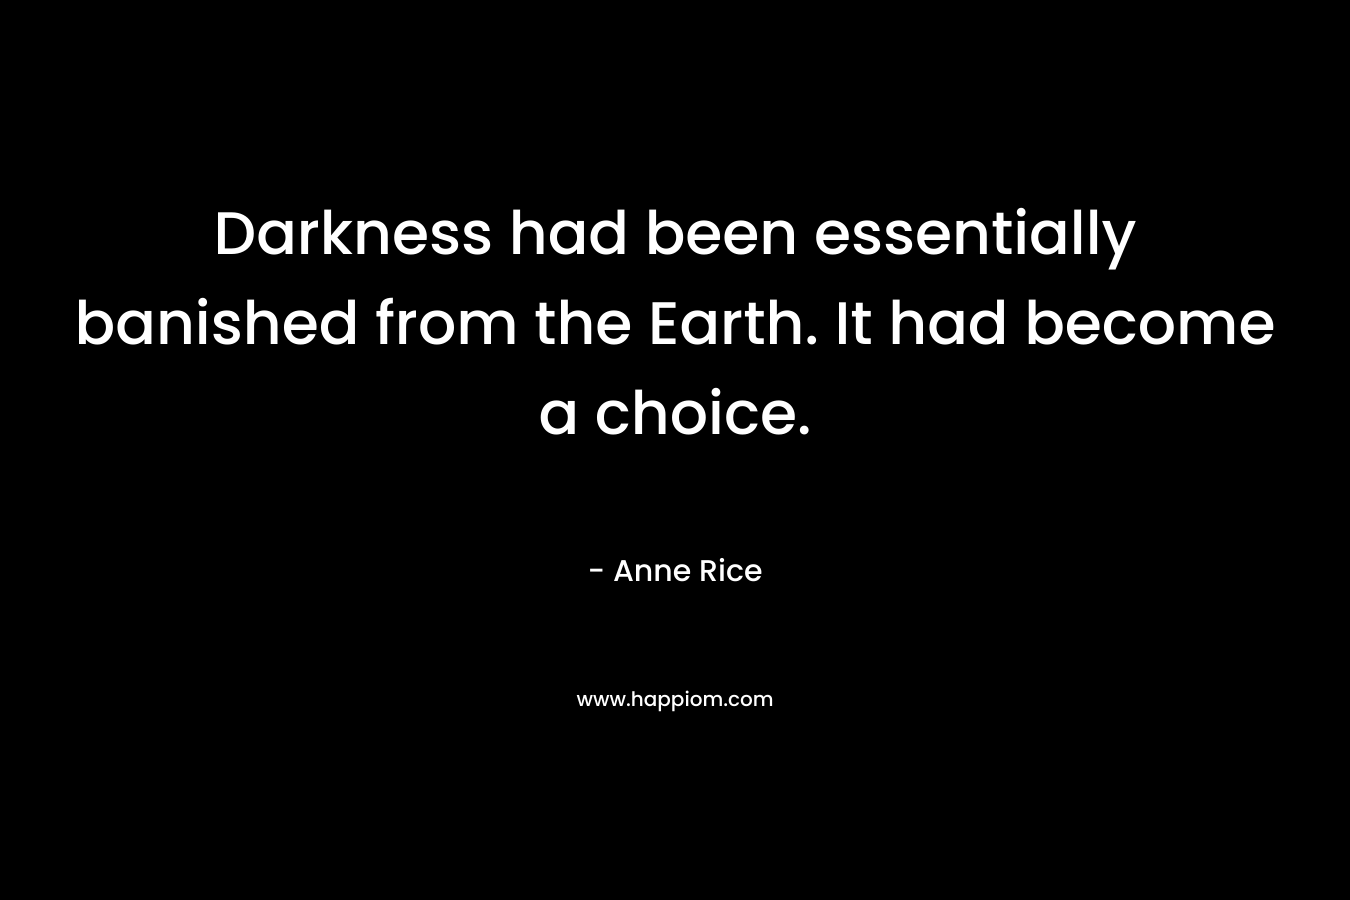 Darkness had been essentially banished from the Earth. It had become a choice.